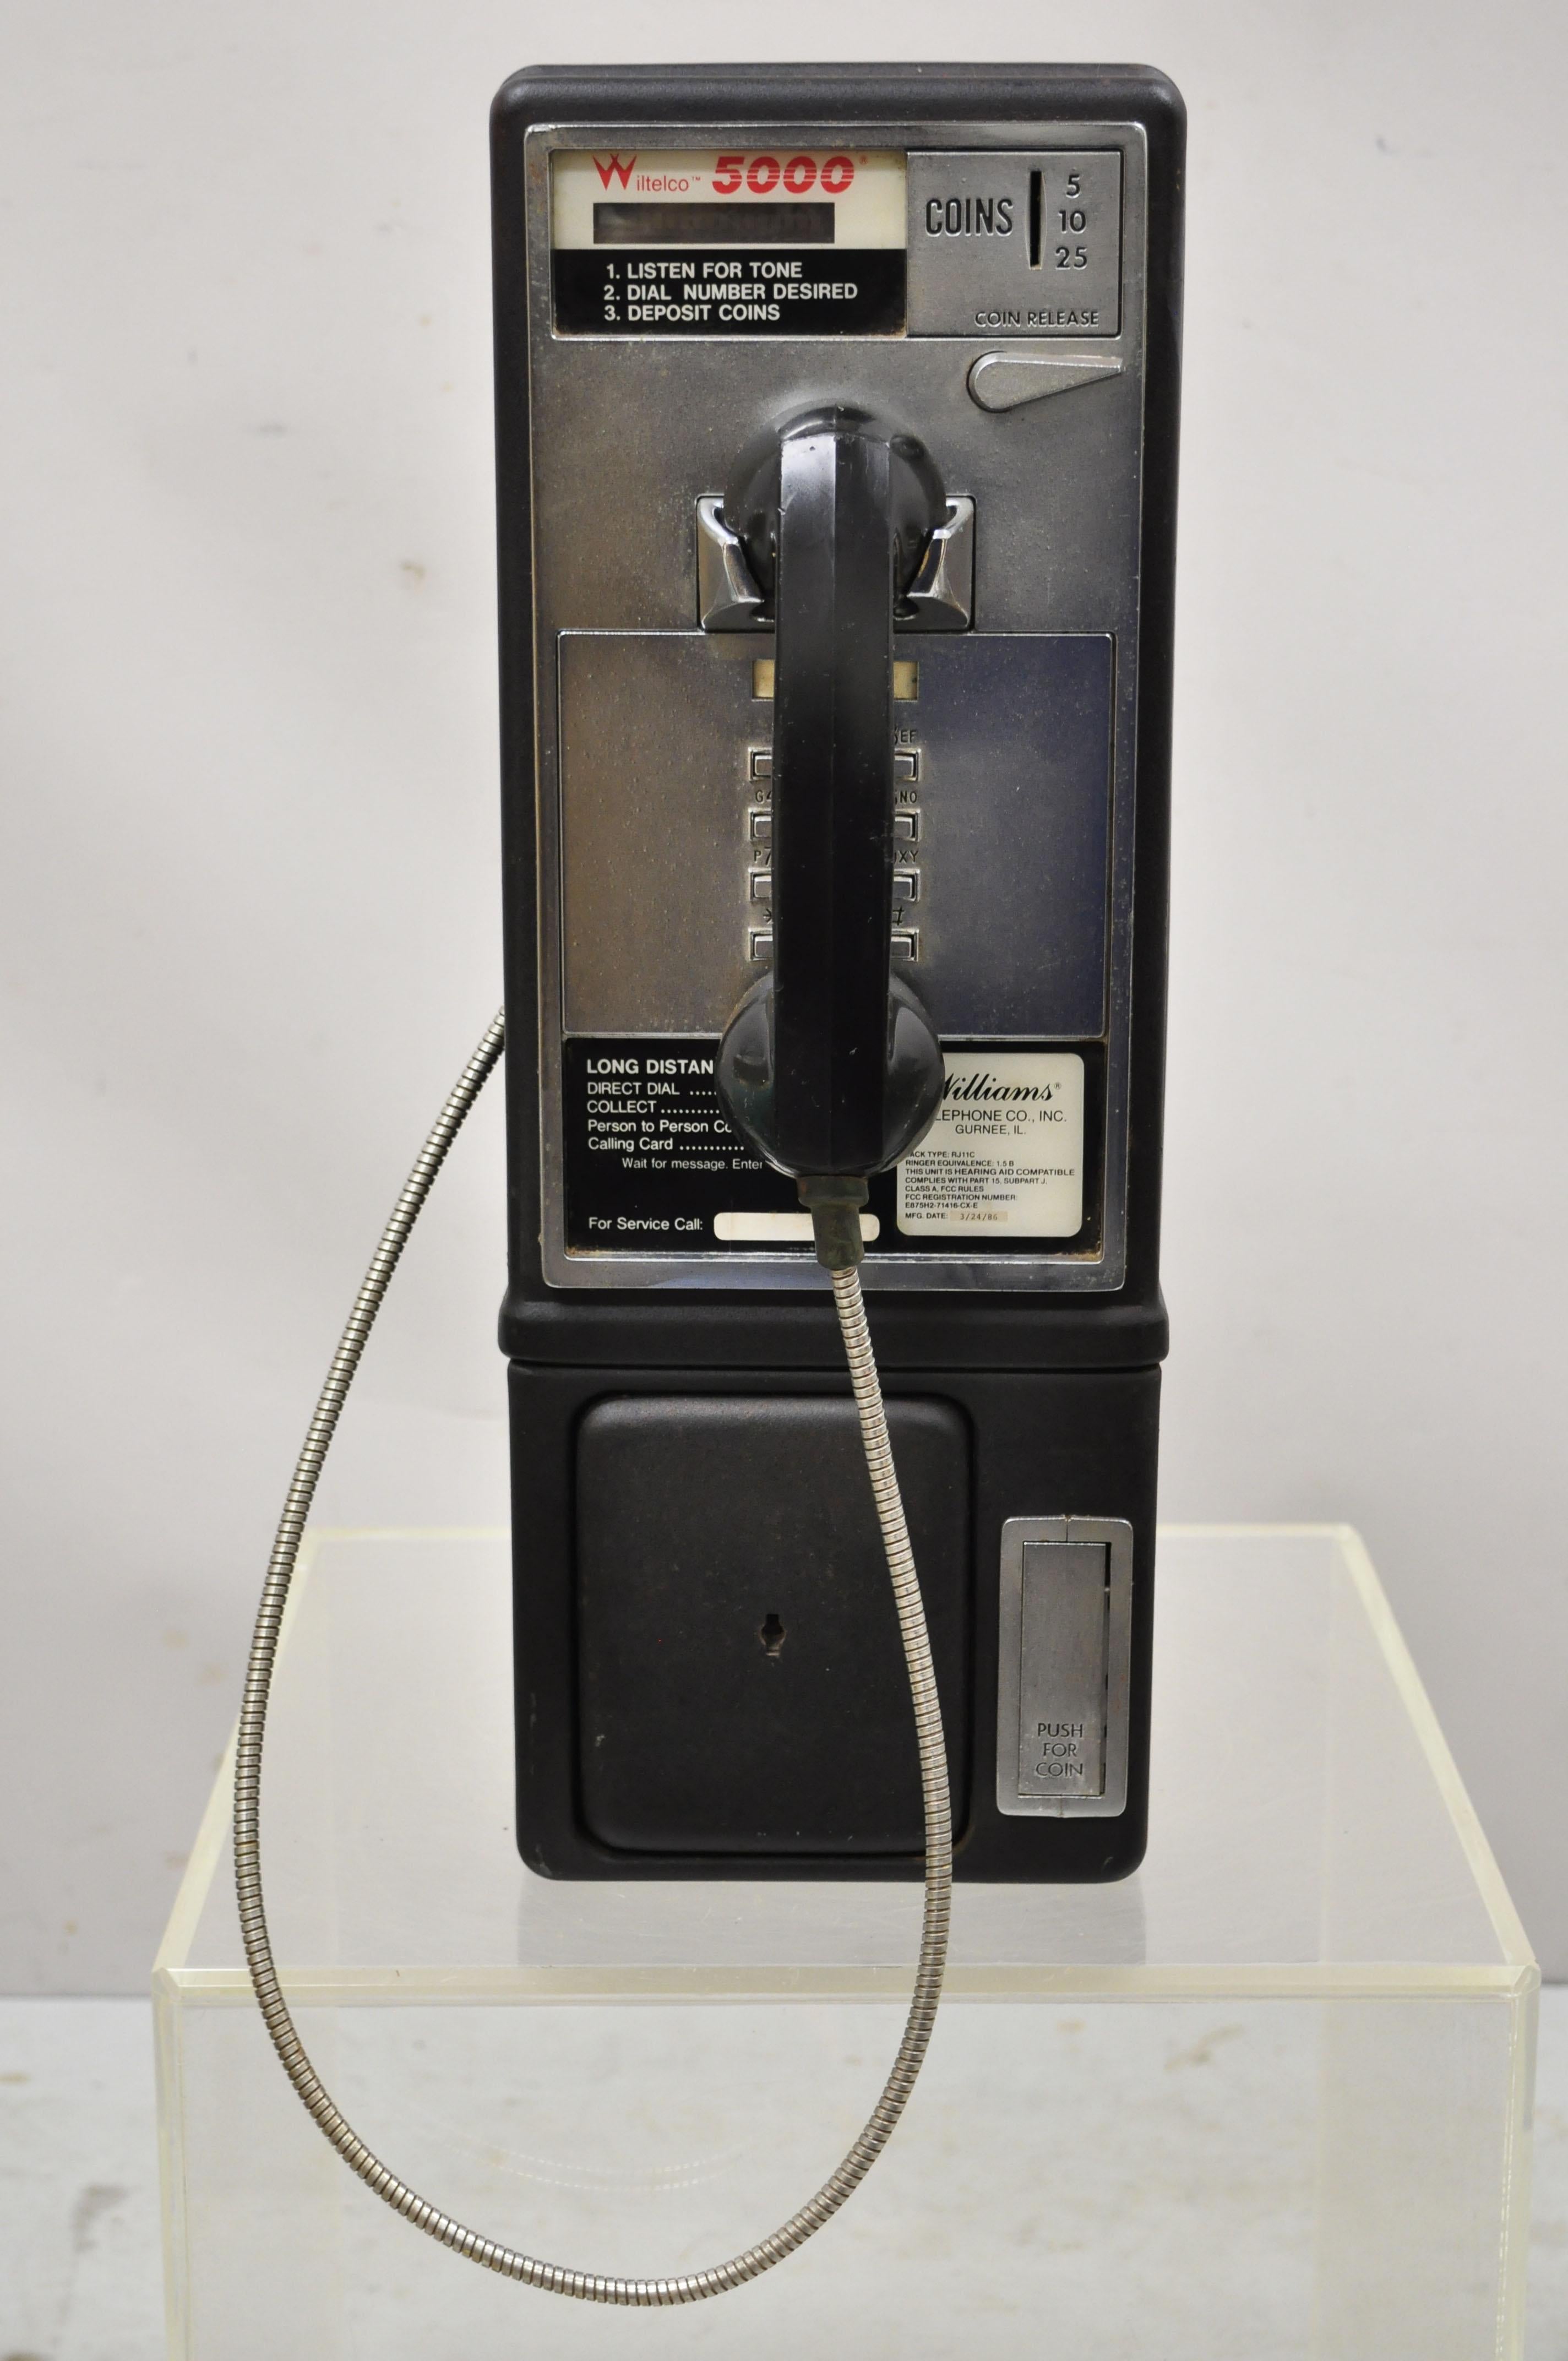 Vintage 1986 Wiltelco 5000 Williams Telephone Co. Intelligent Pay Phone Coin Op. Item features heavy cast iron construction, very rare vintage model, original label, very nice vintage item, quality American craftsmanship, great style and form.